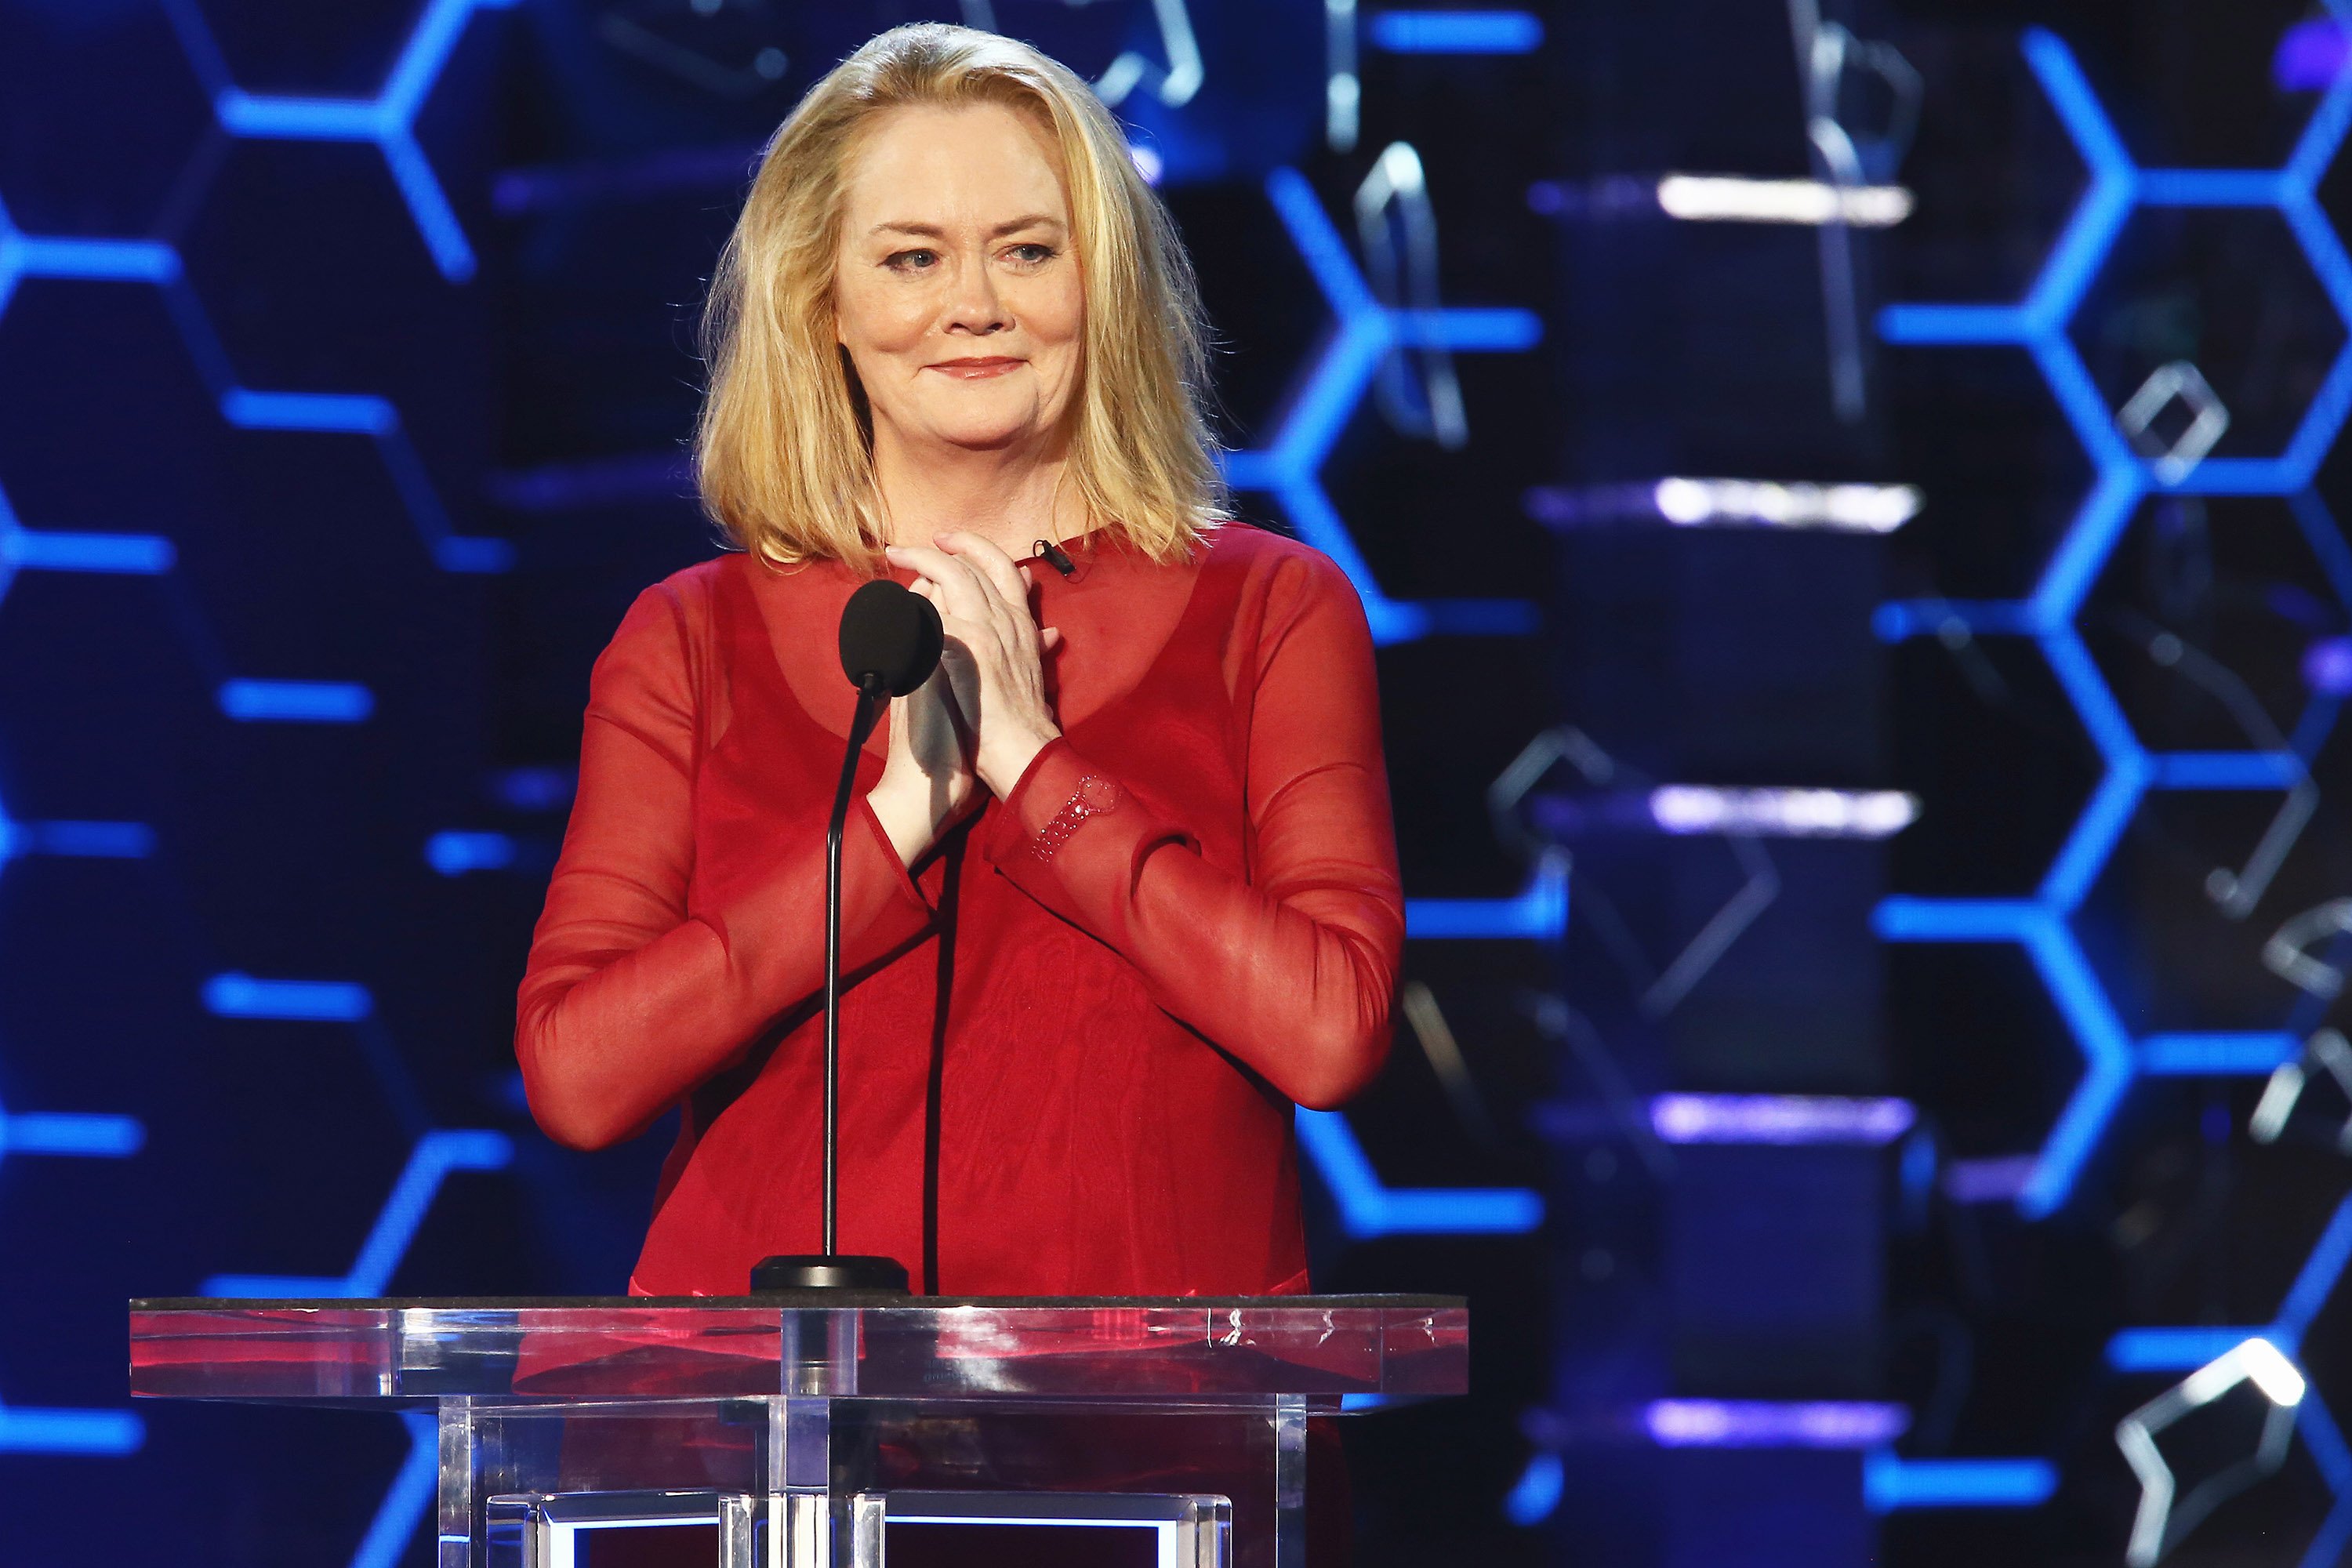 Cybill Shepherd attends the Comedy Central Roast Of Bruce Willis on July 14, 2018 | Photo: GettyImages